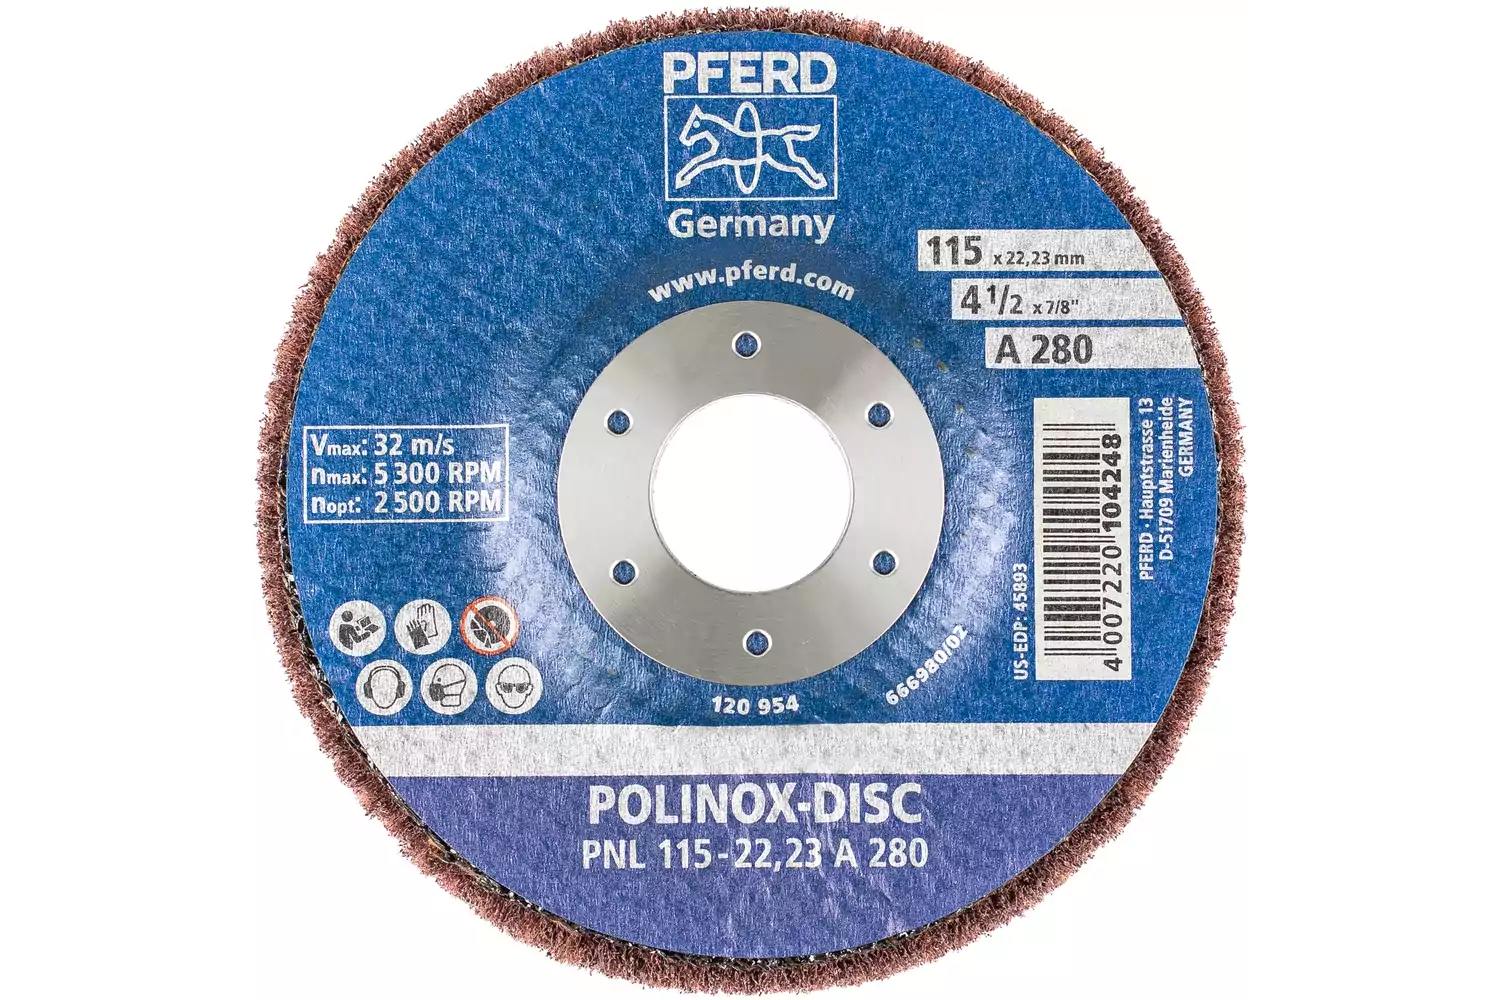 POLINOX non-woven fibre-backing disc PNL dia. 115 mm centre hole dia. 22.23 mm A280 for fine grinding and finishing 3